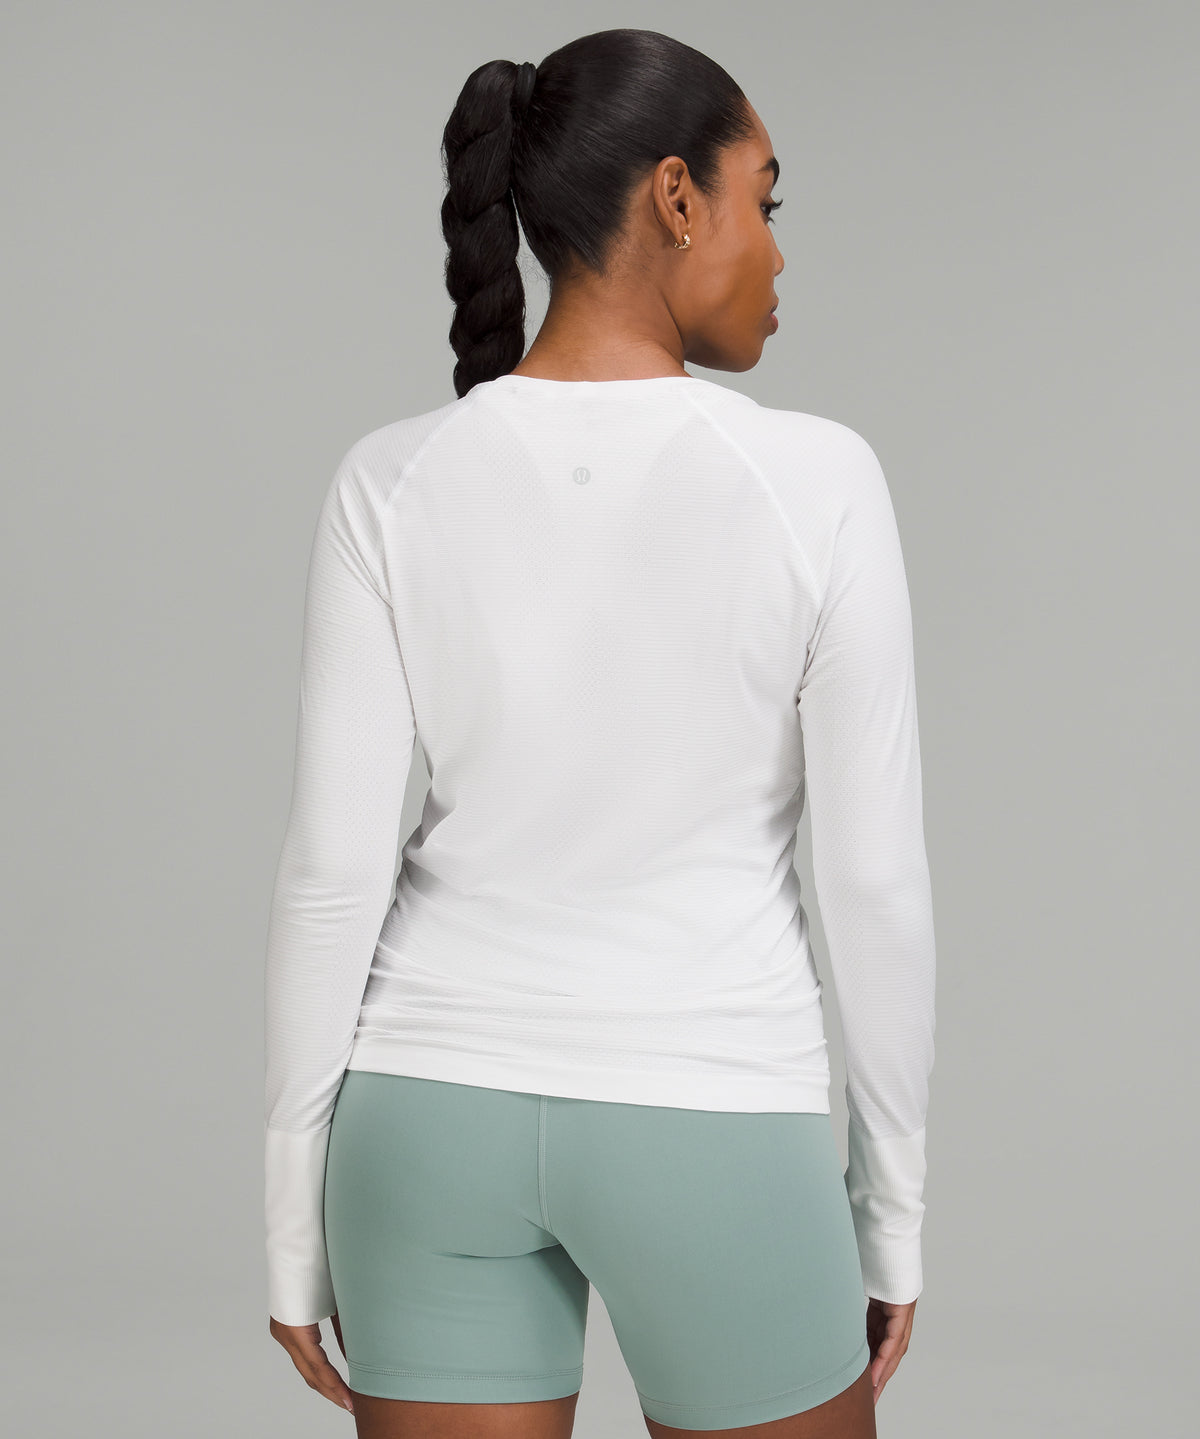 lululemon athletica Swiftly Tech Long Sleeve 2.0 Top in White